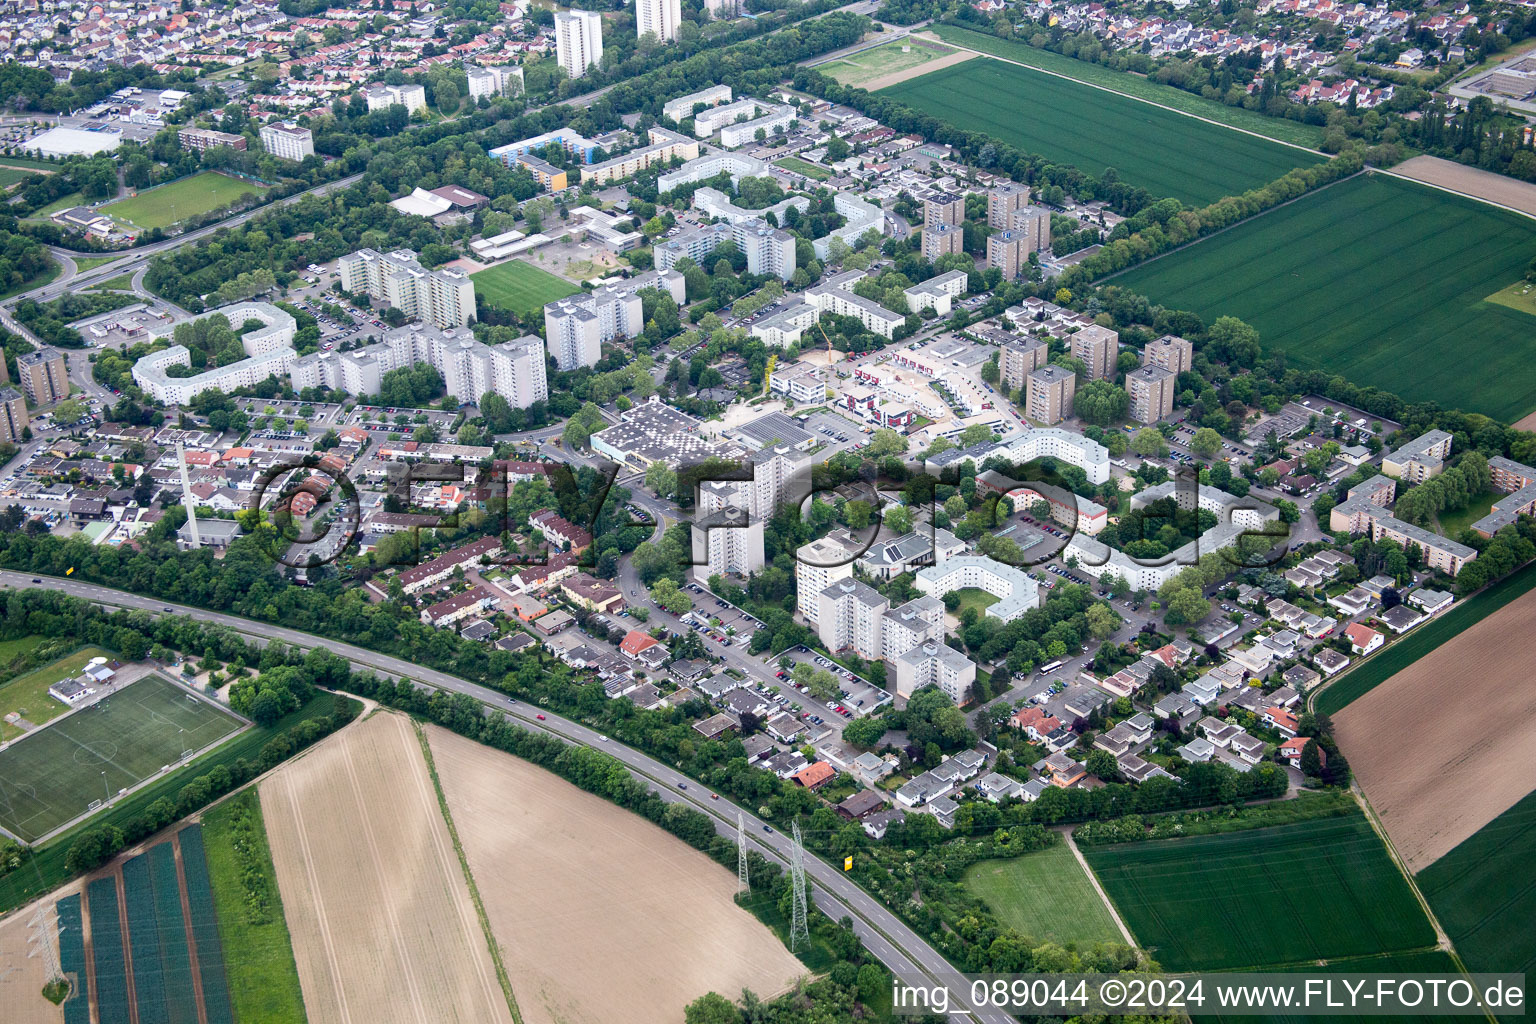 High-rise ensemble of Londoner Ring in the district Pfingtsweide in Ludwigshafen am Rhein in the state Rhineland-Palatinate